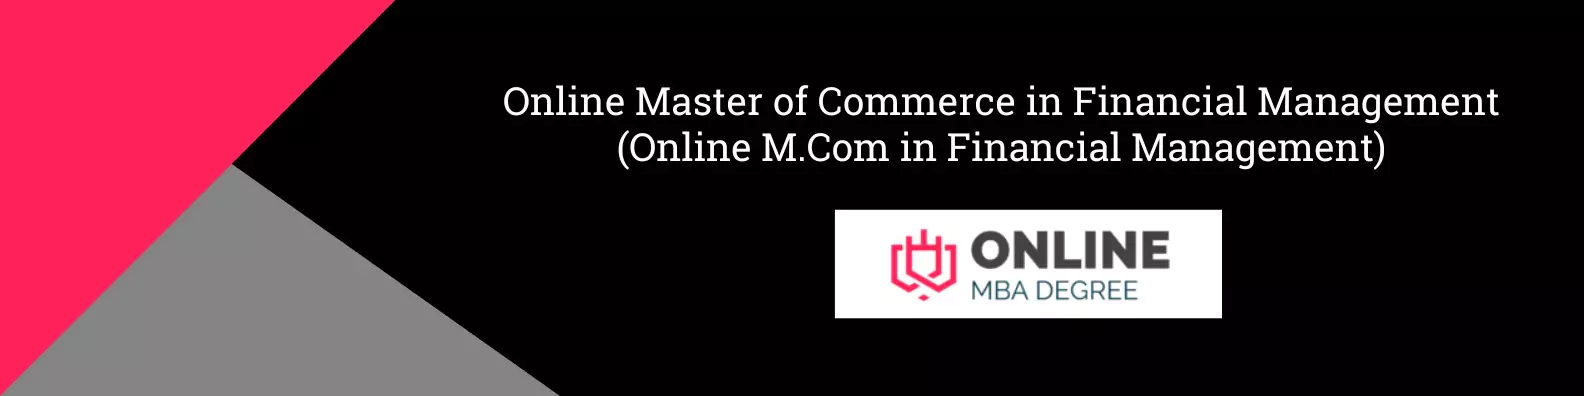 Online M.Com Degree in Financial Management